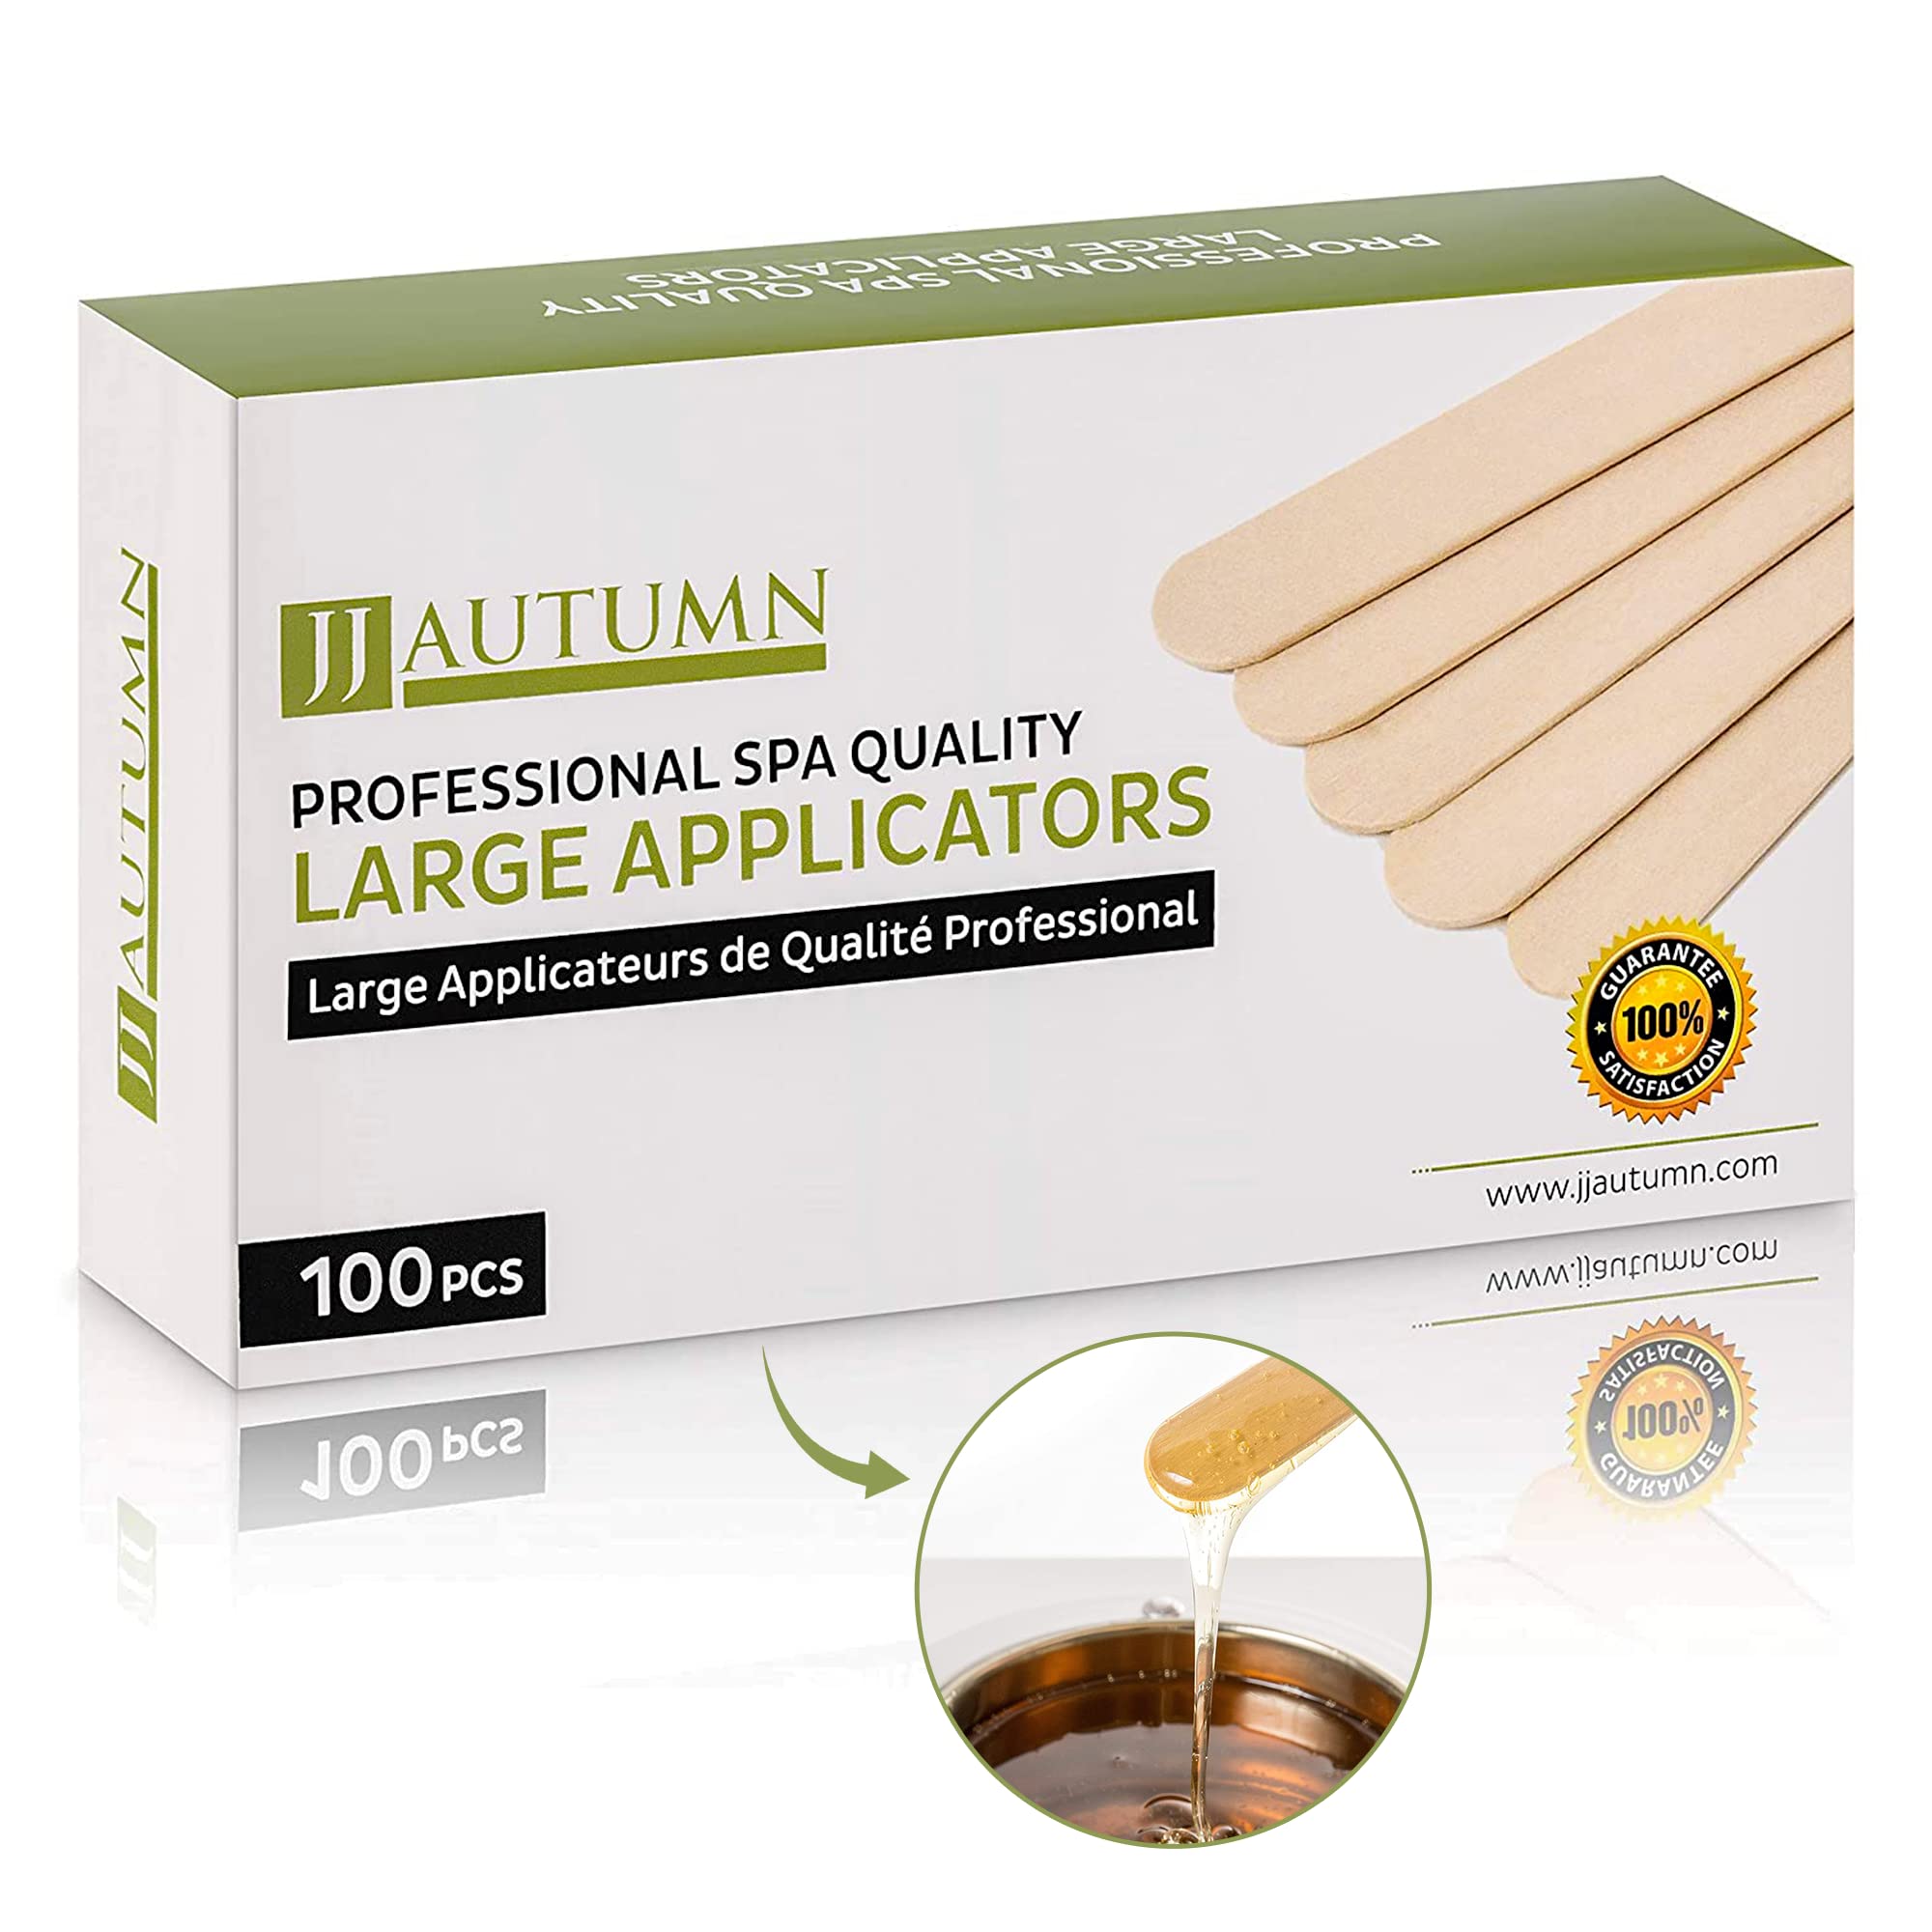 JJ Autumn Wooden Wax Sticks for Hair Removal